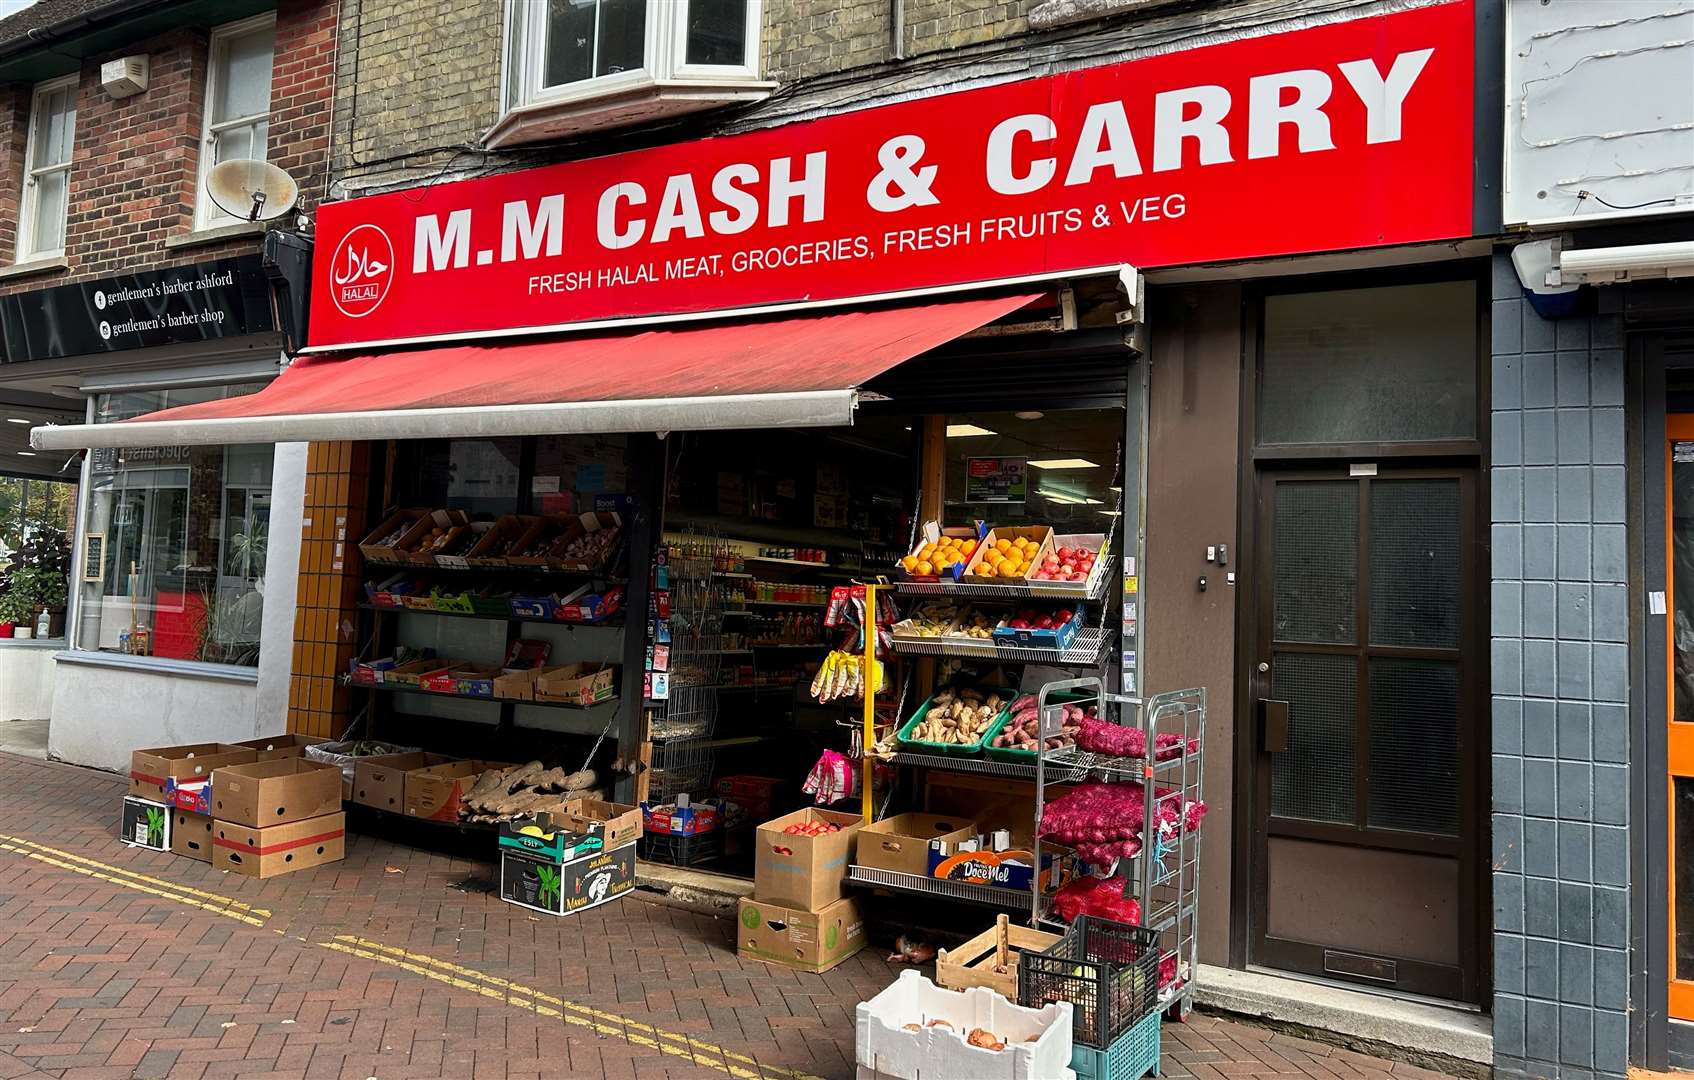 M.M Cash and Carry was inspected by Ashford Borough Council in August